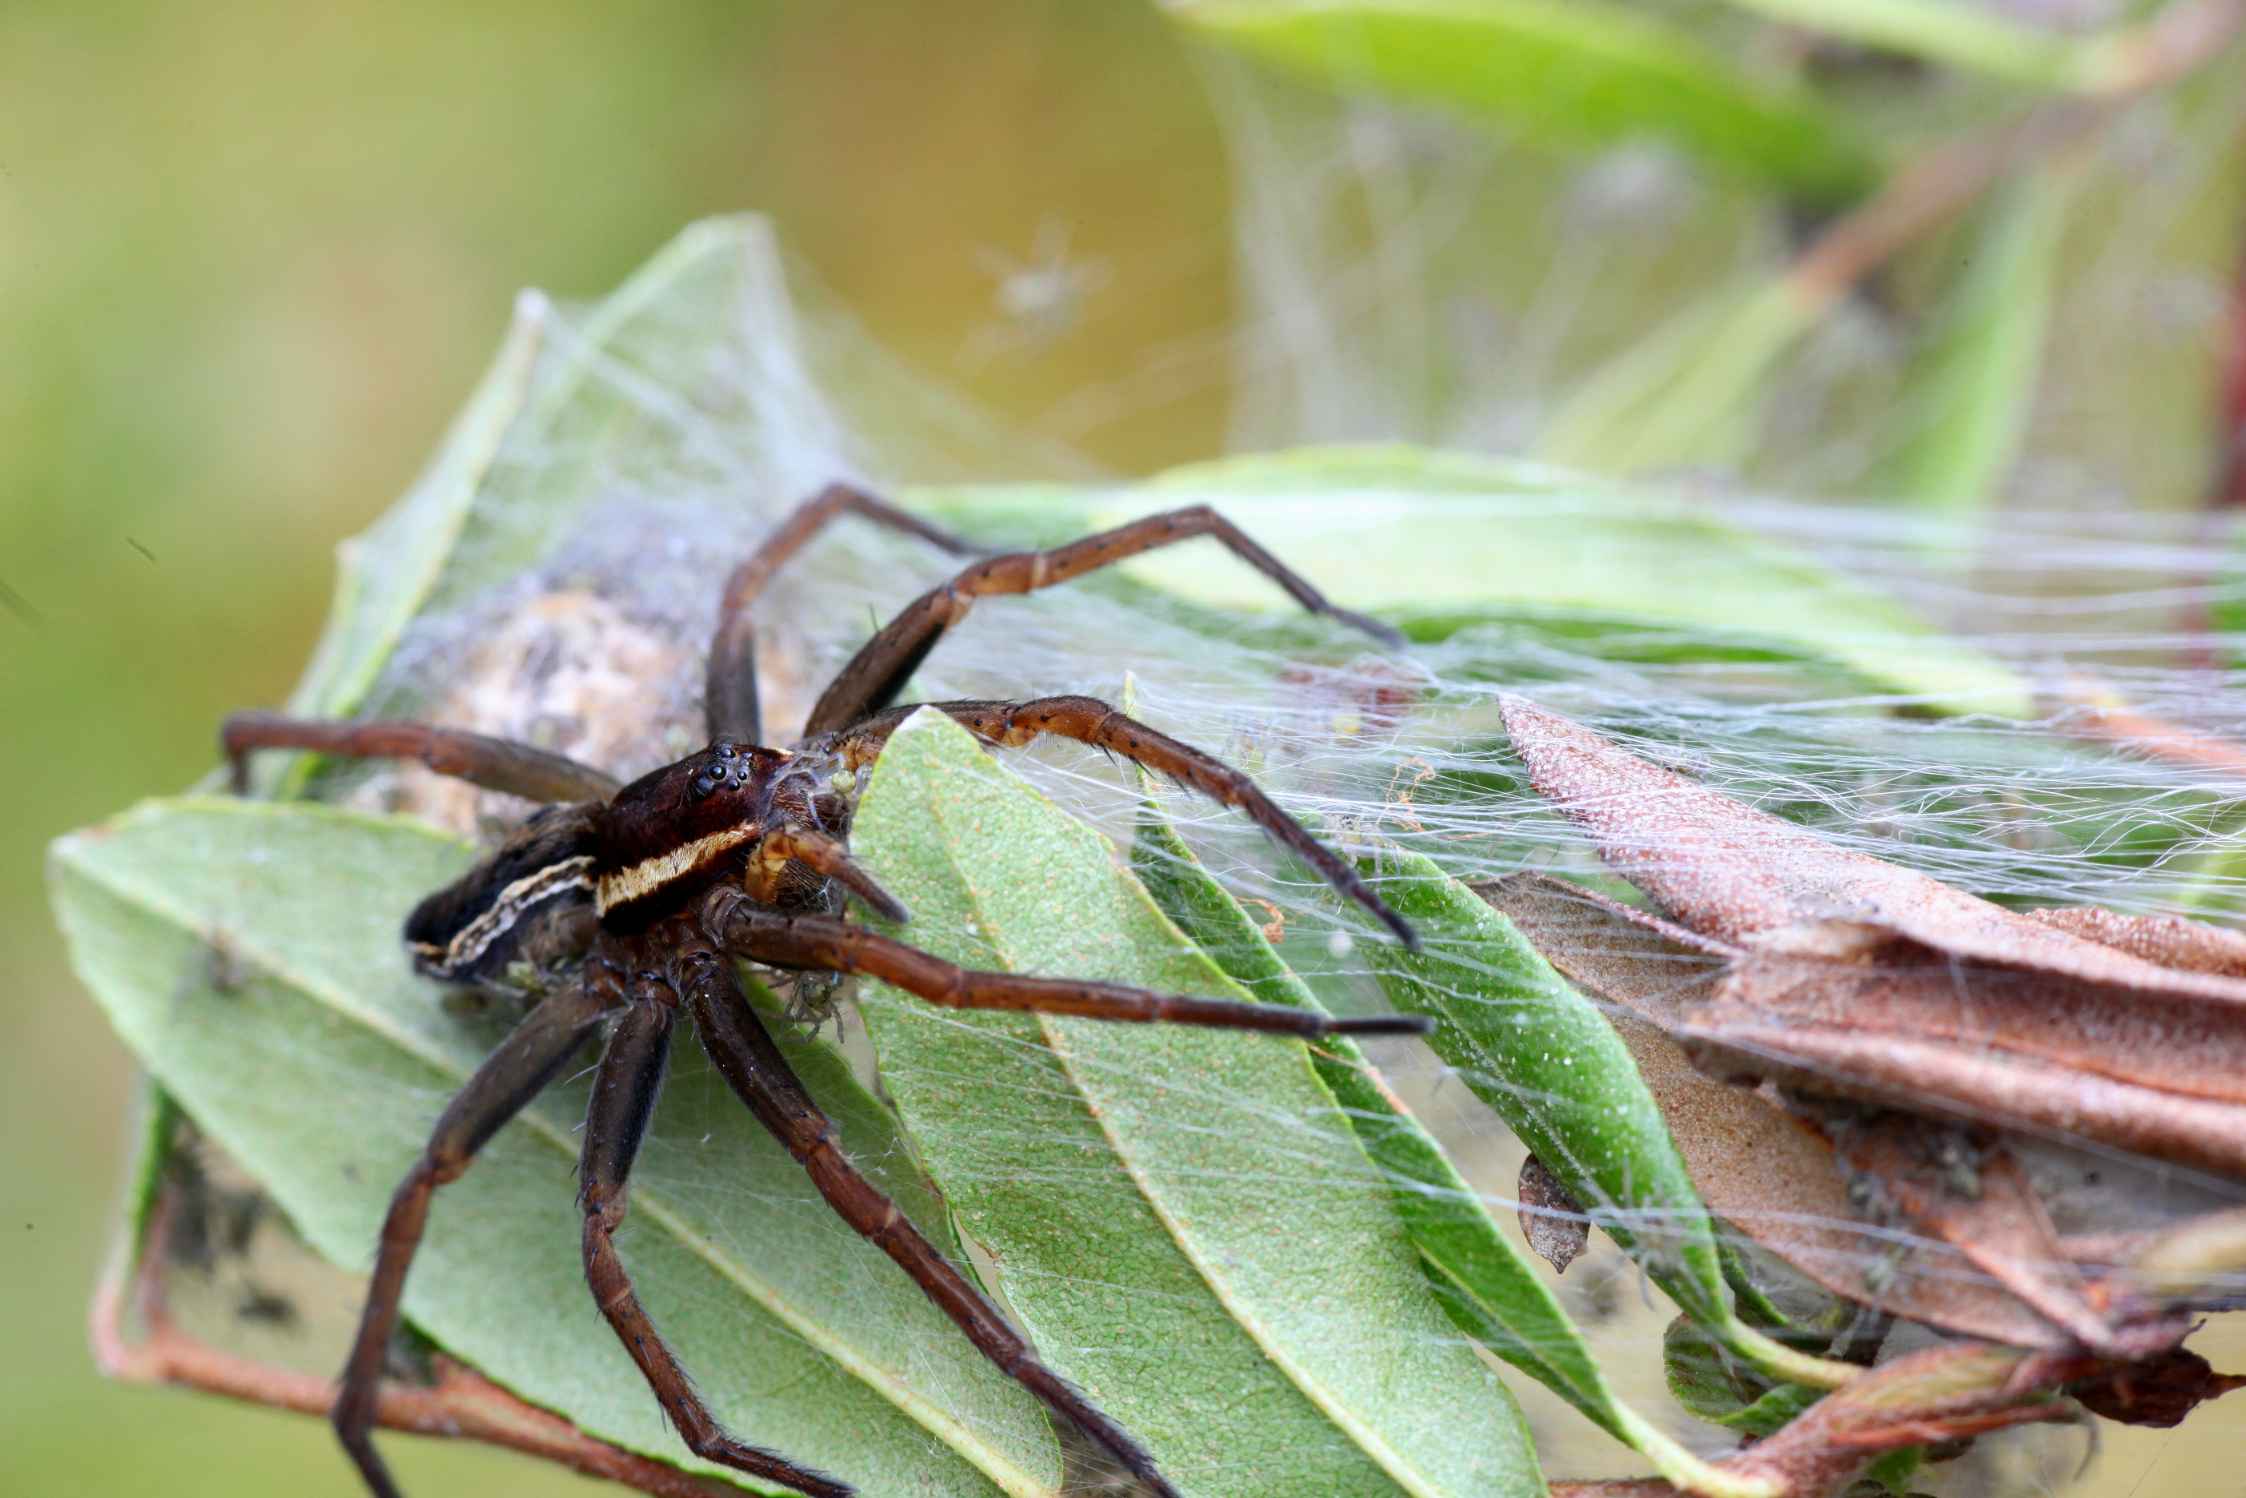 the biggest and most poisonous of European spiders